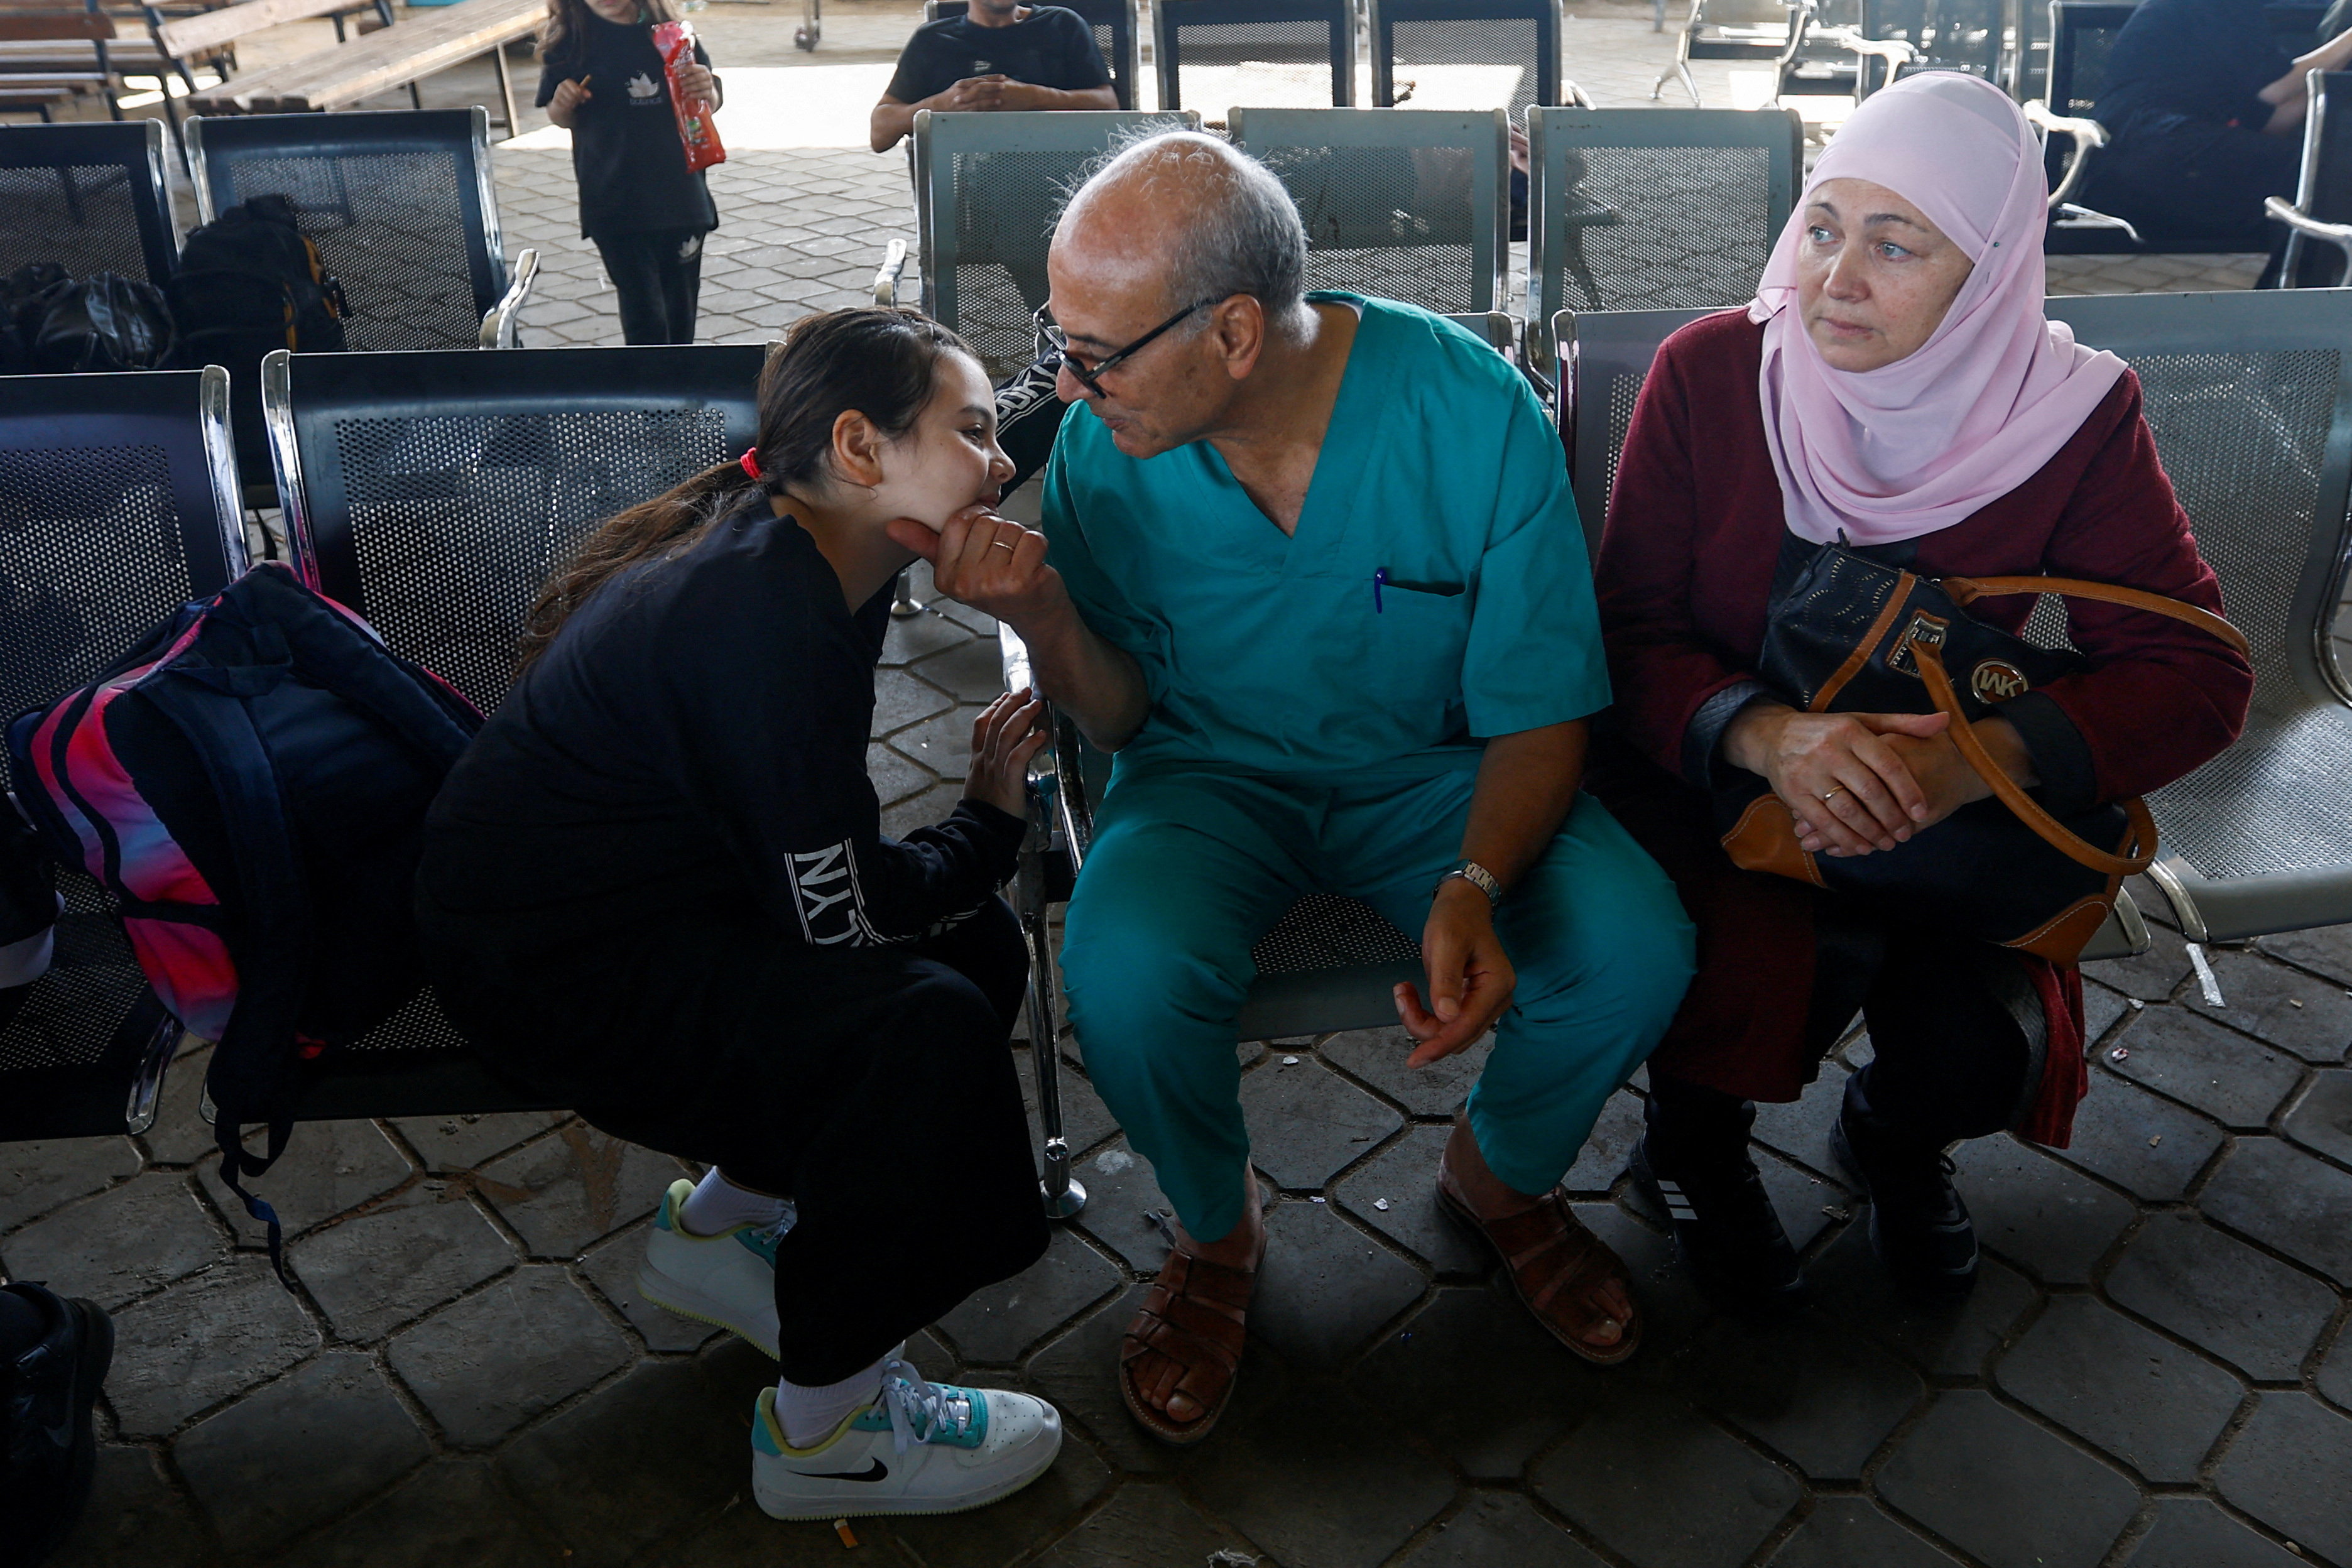 Gazan doctor says goodbye to family at Rafah, stays back to treat patients